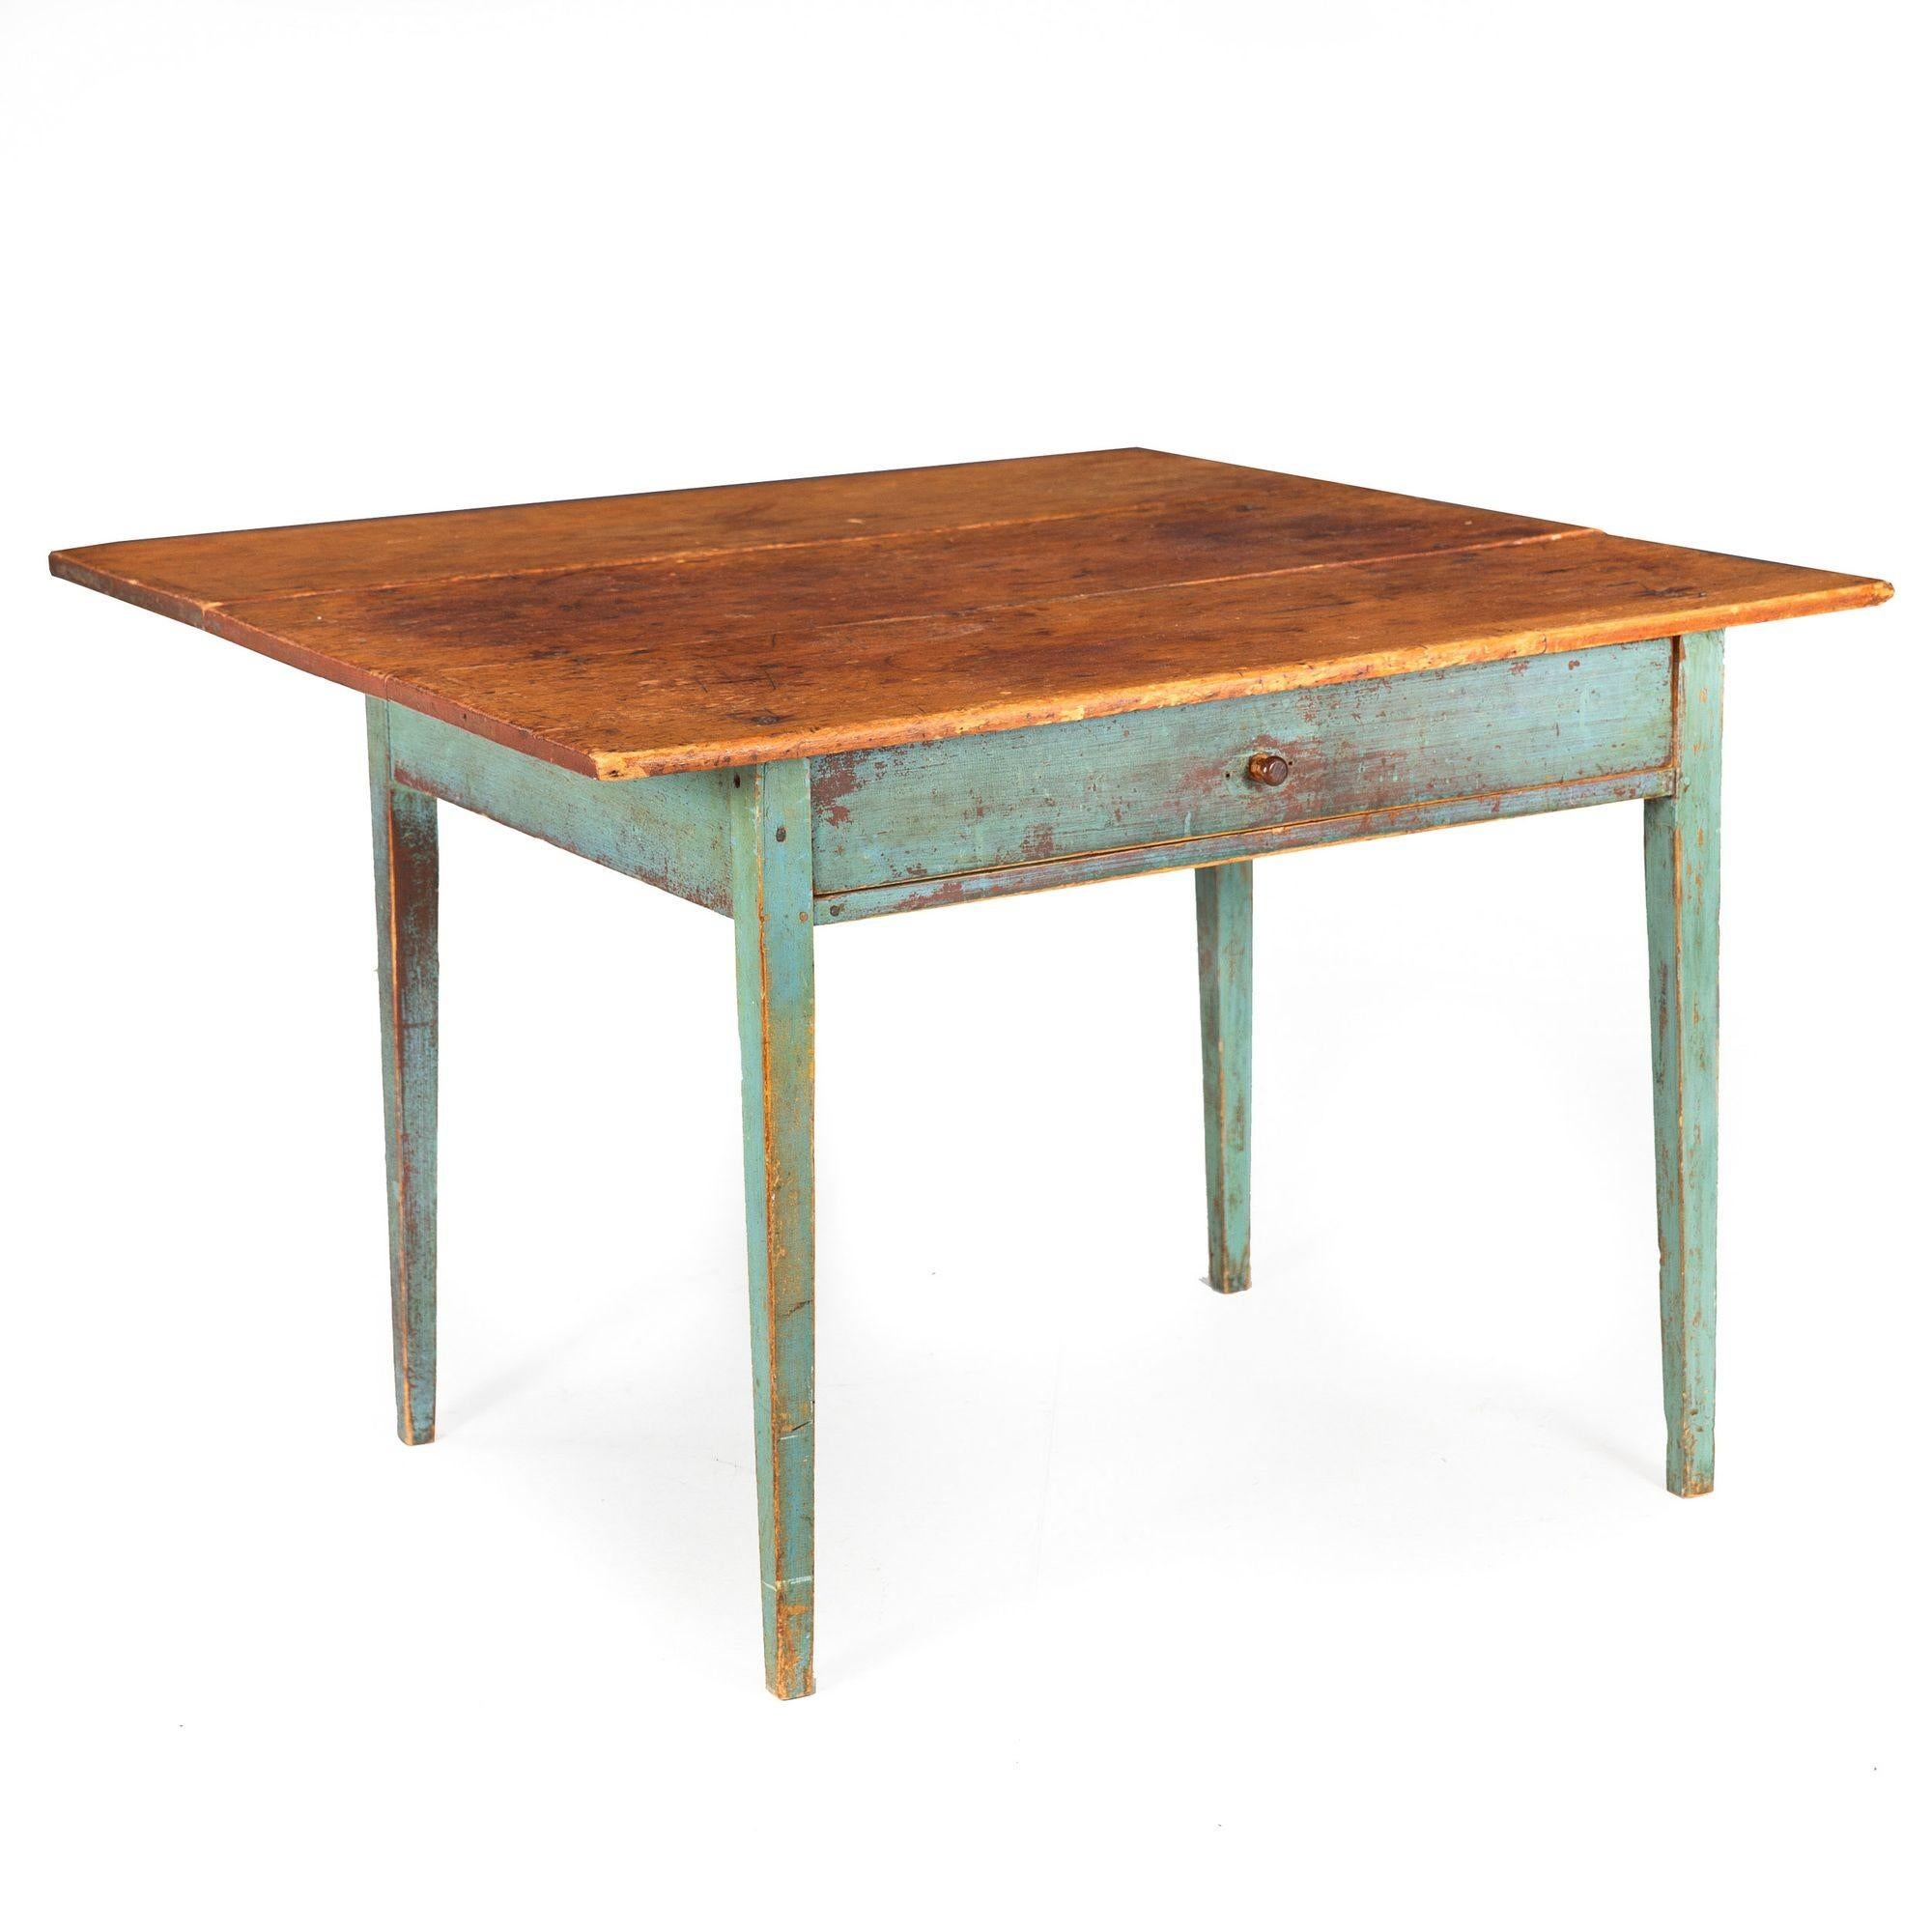 A delightful early 19th century work table, it features a single drop leaf that falls neatly behind the table over one original hinge (one replaced). Crafted out of several boards of scrubbed pine, there are trace remnants of a nearly maroon-red